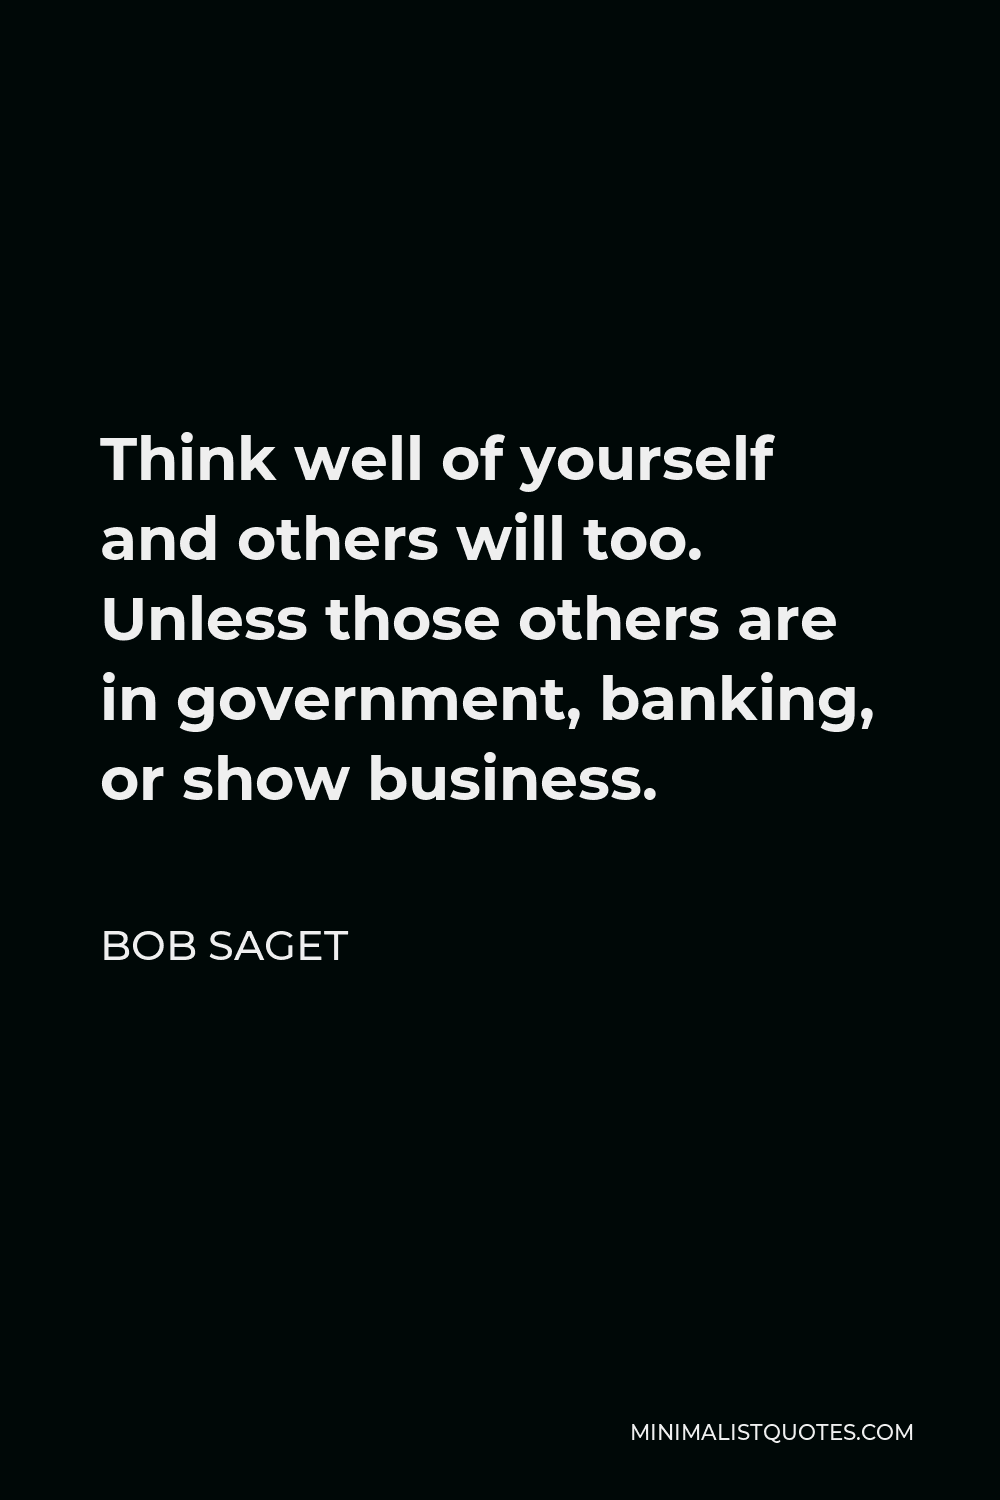 Bob Saget Quote - Think well of yourself and others will too. Unless those others are in government, banking, or show business.